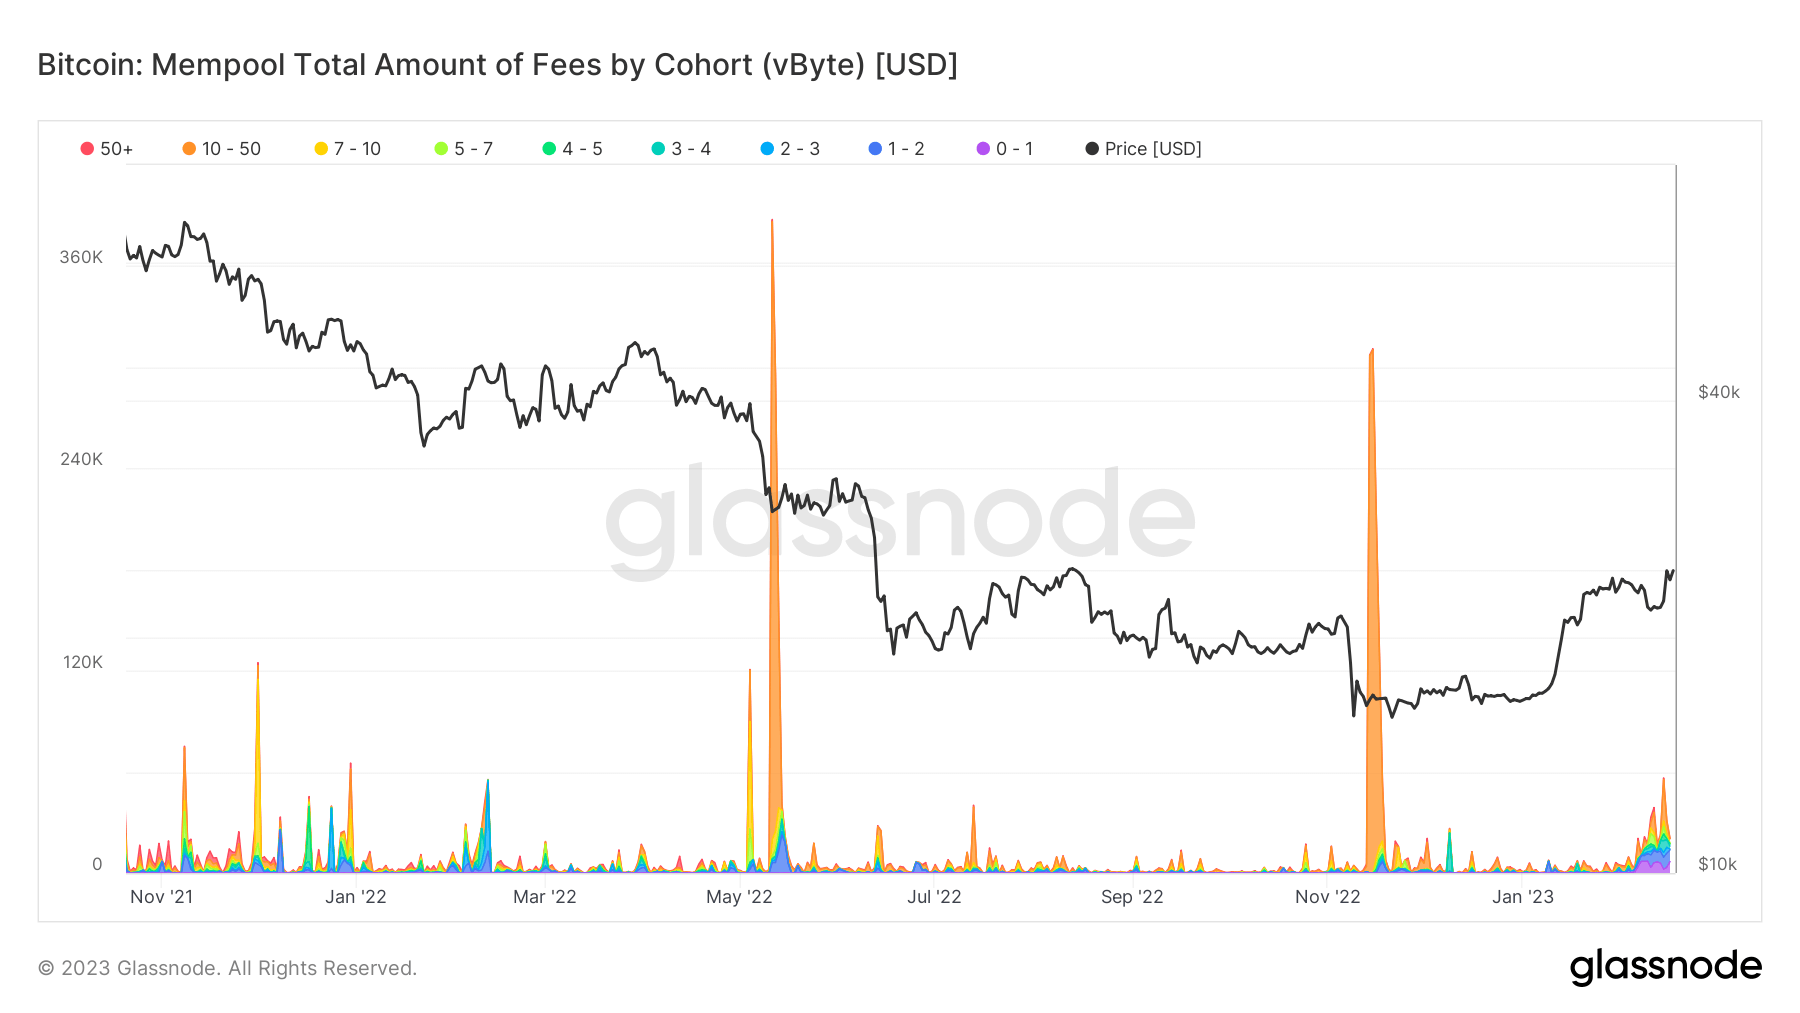 Bitcoin: Mempool total amount of fees by cohort 